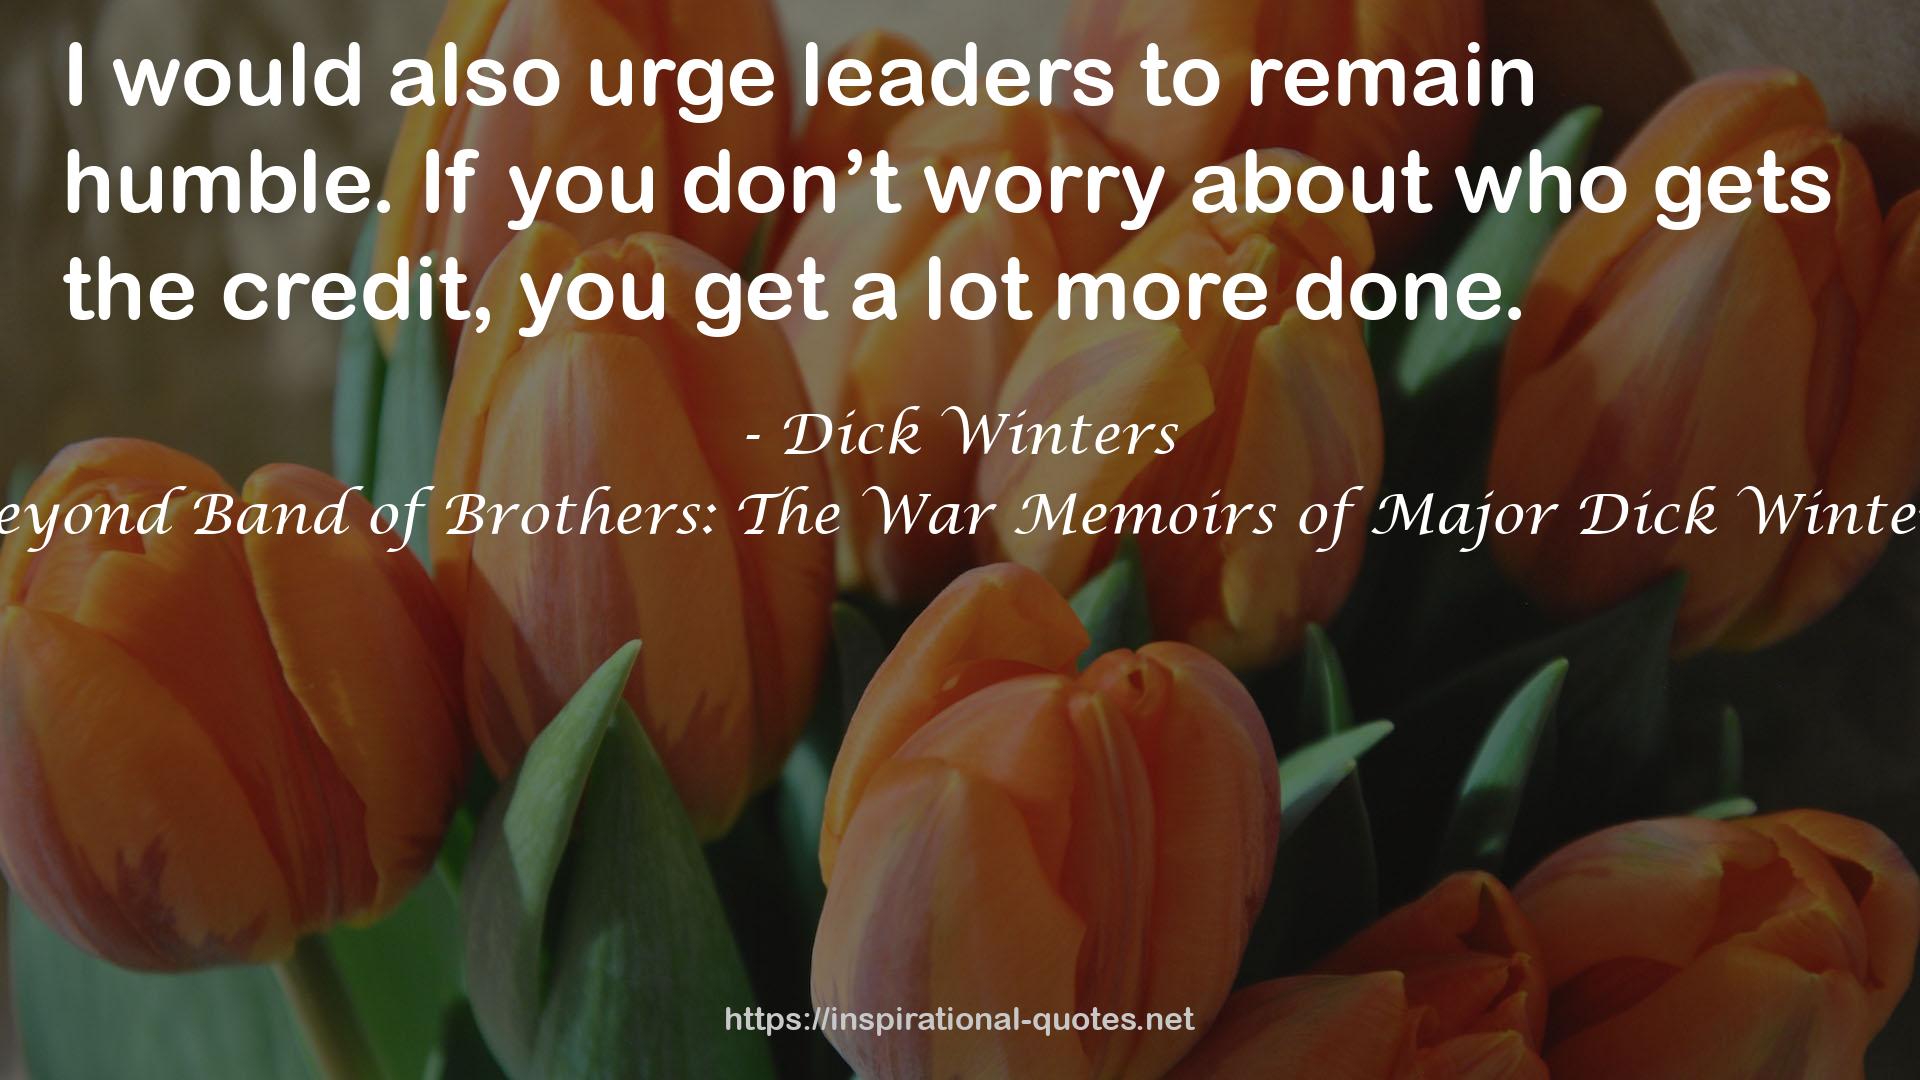 Dick Winters QUOTES